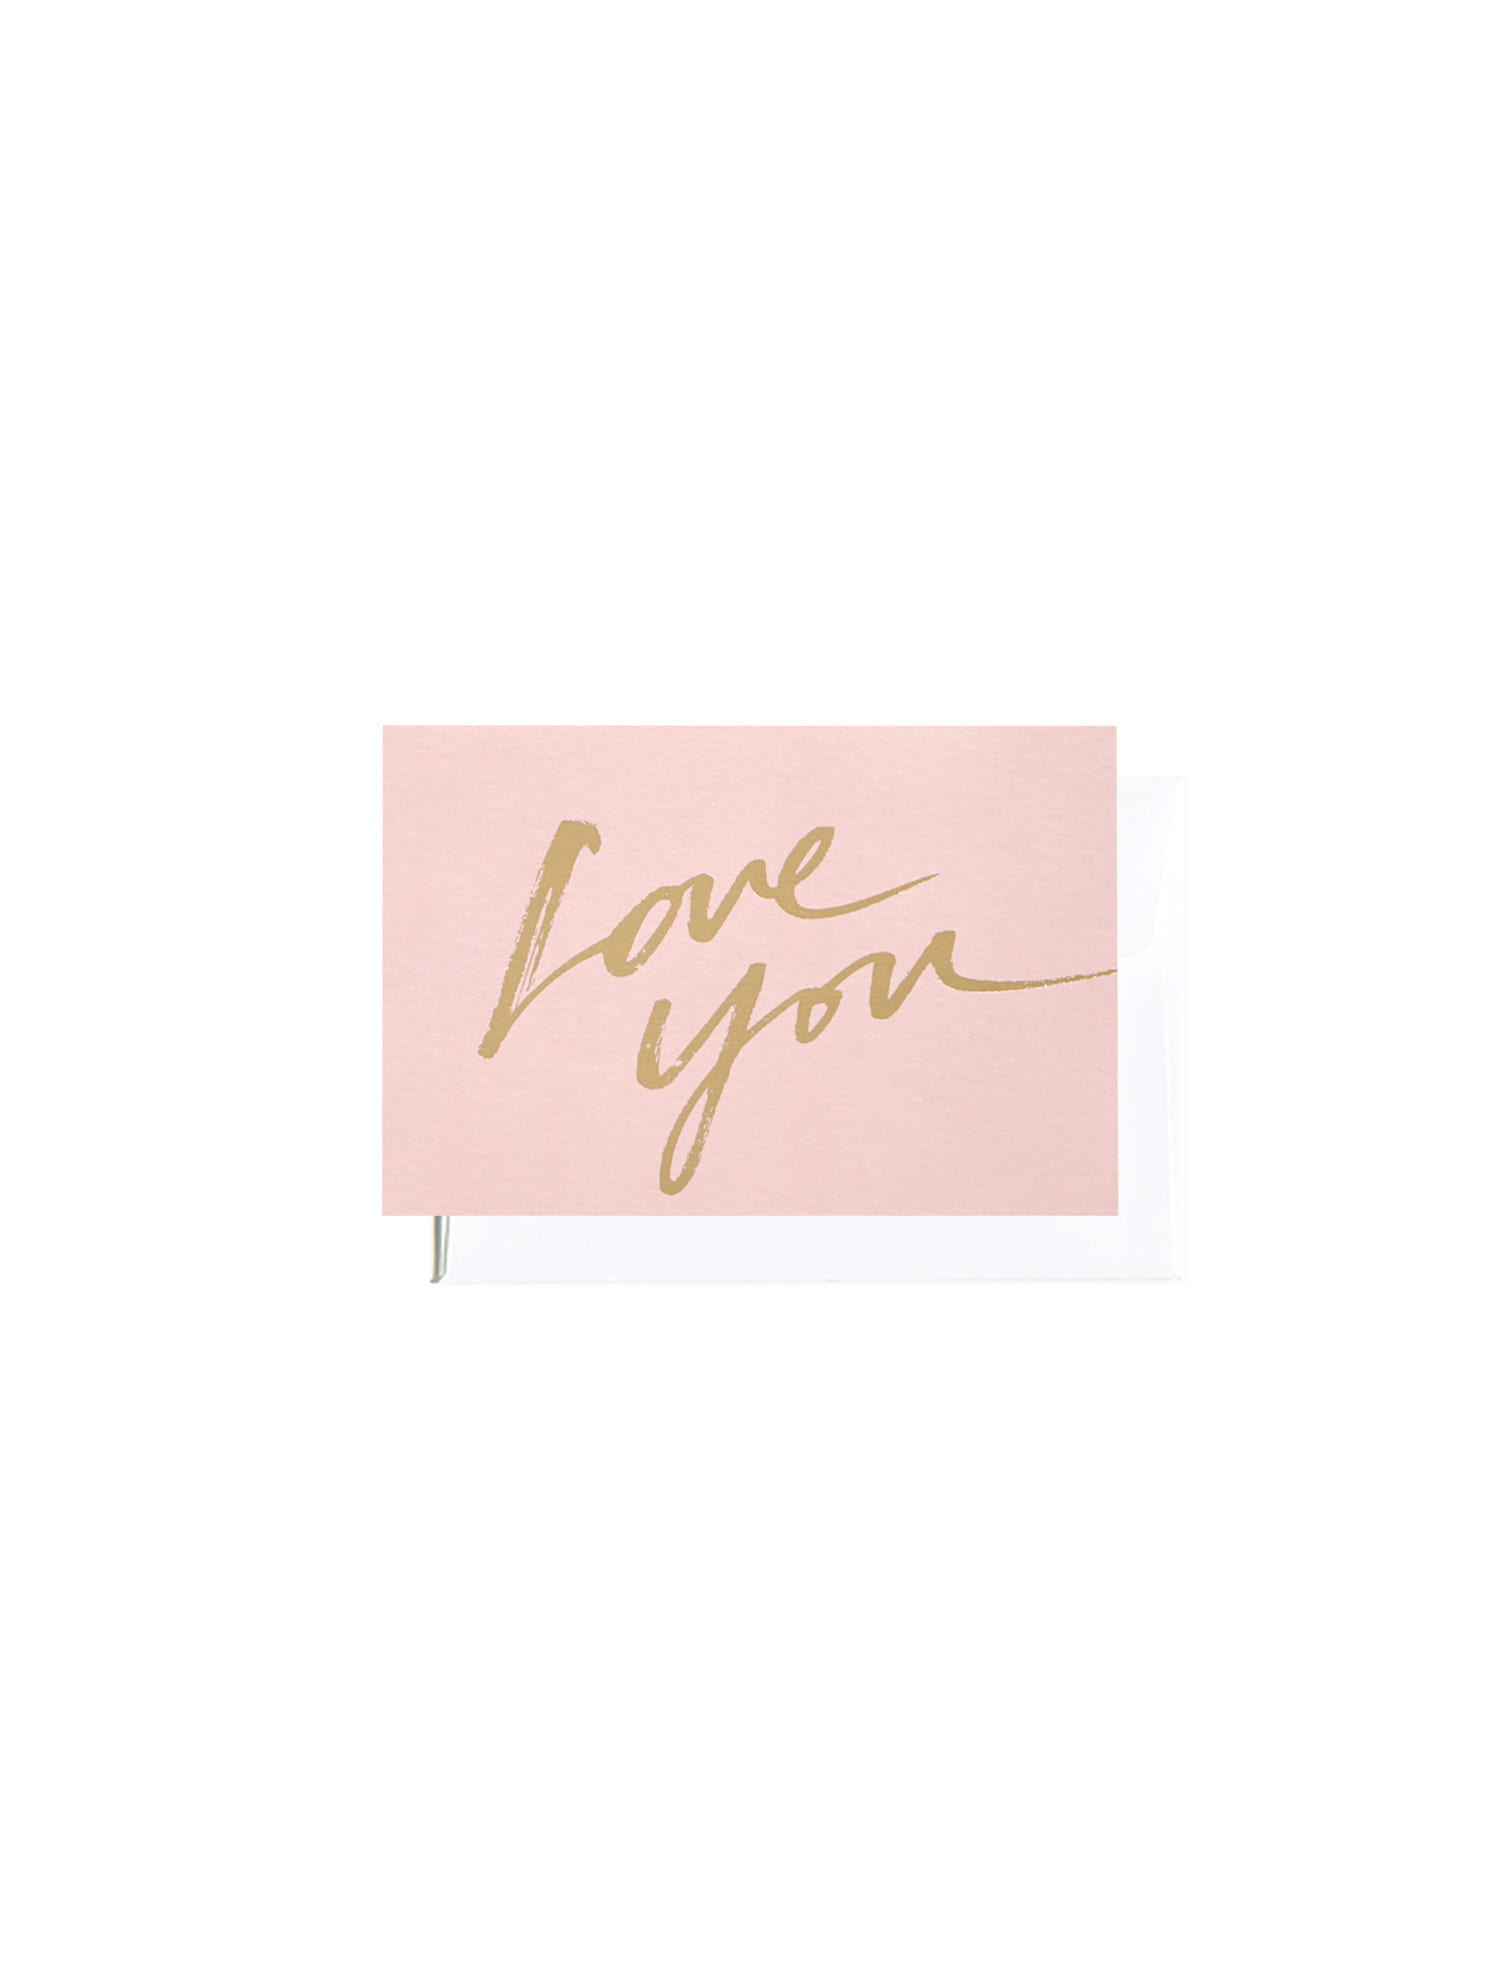 Love you calligraphy message card